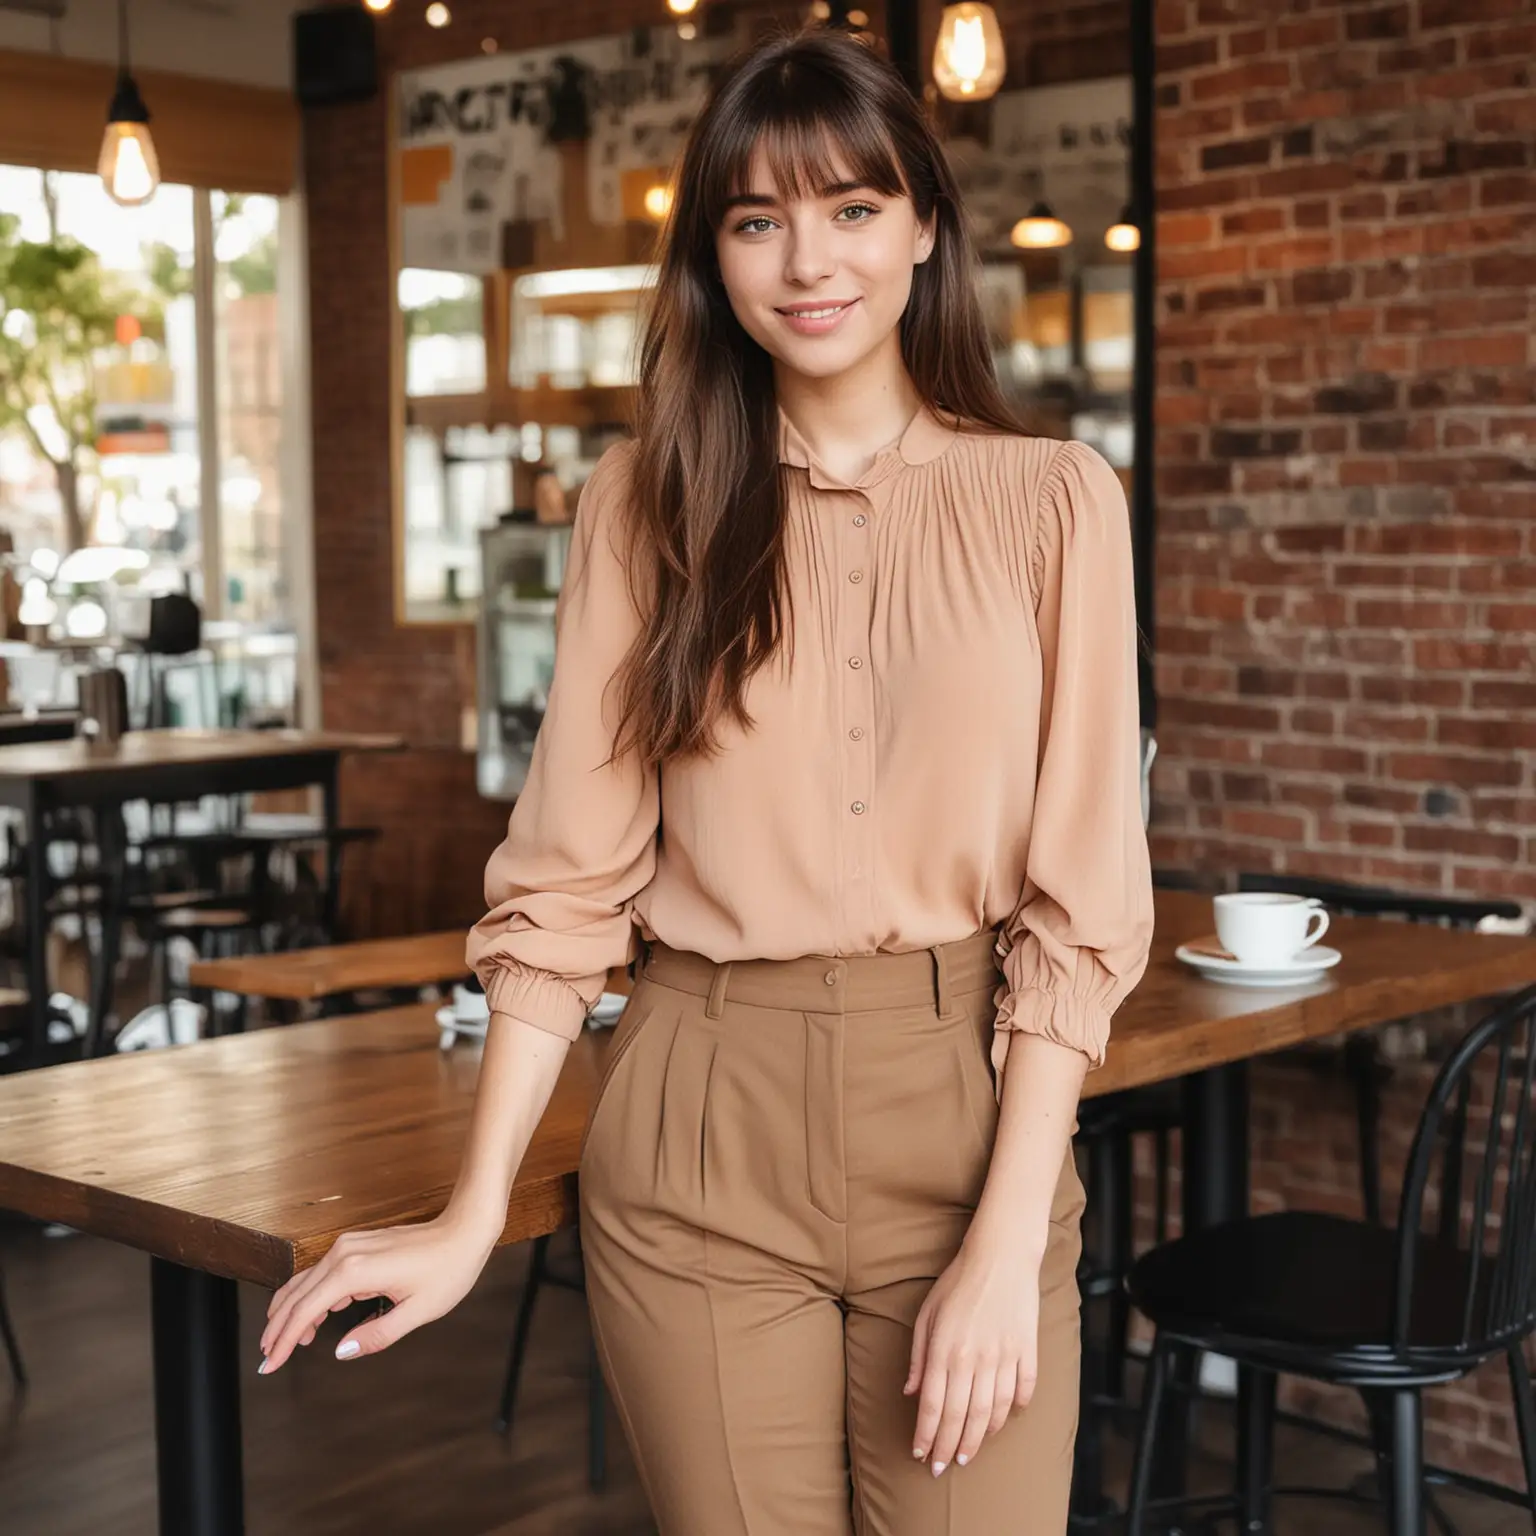 Teenage Girl in Casual Attire for Job Interview at Coffee Shop